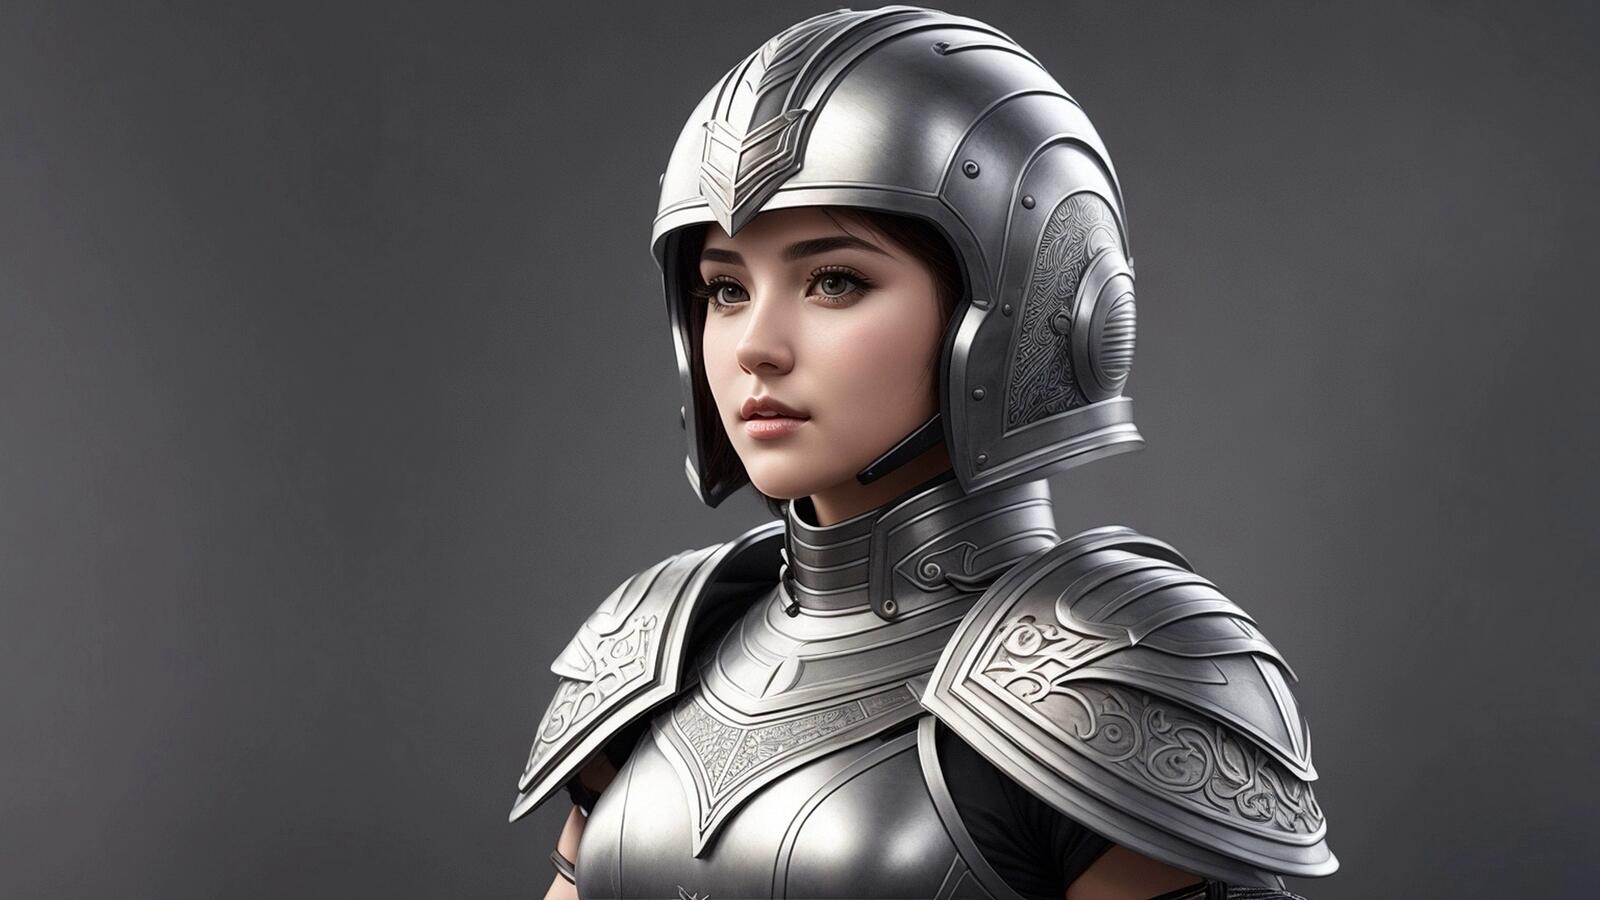 Free photo Girl warrior in silver armor on gray background